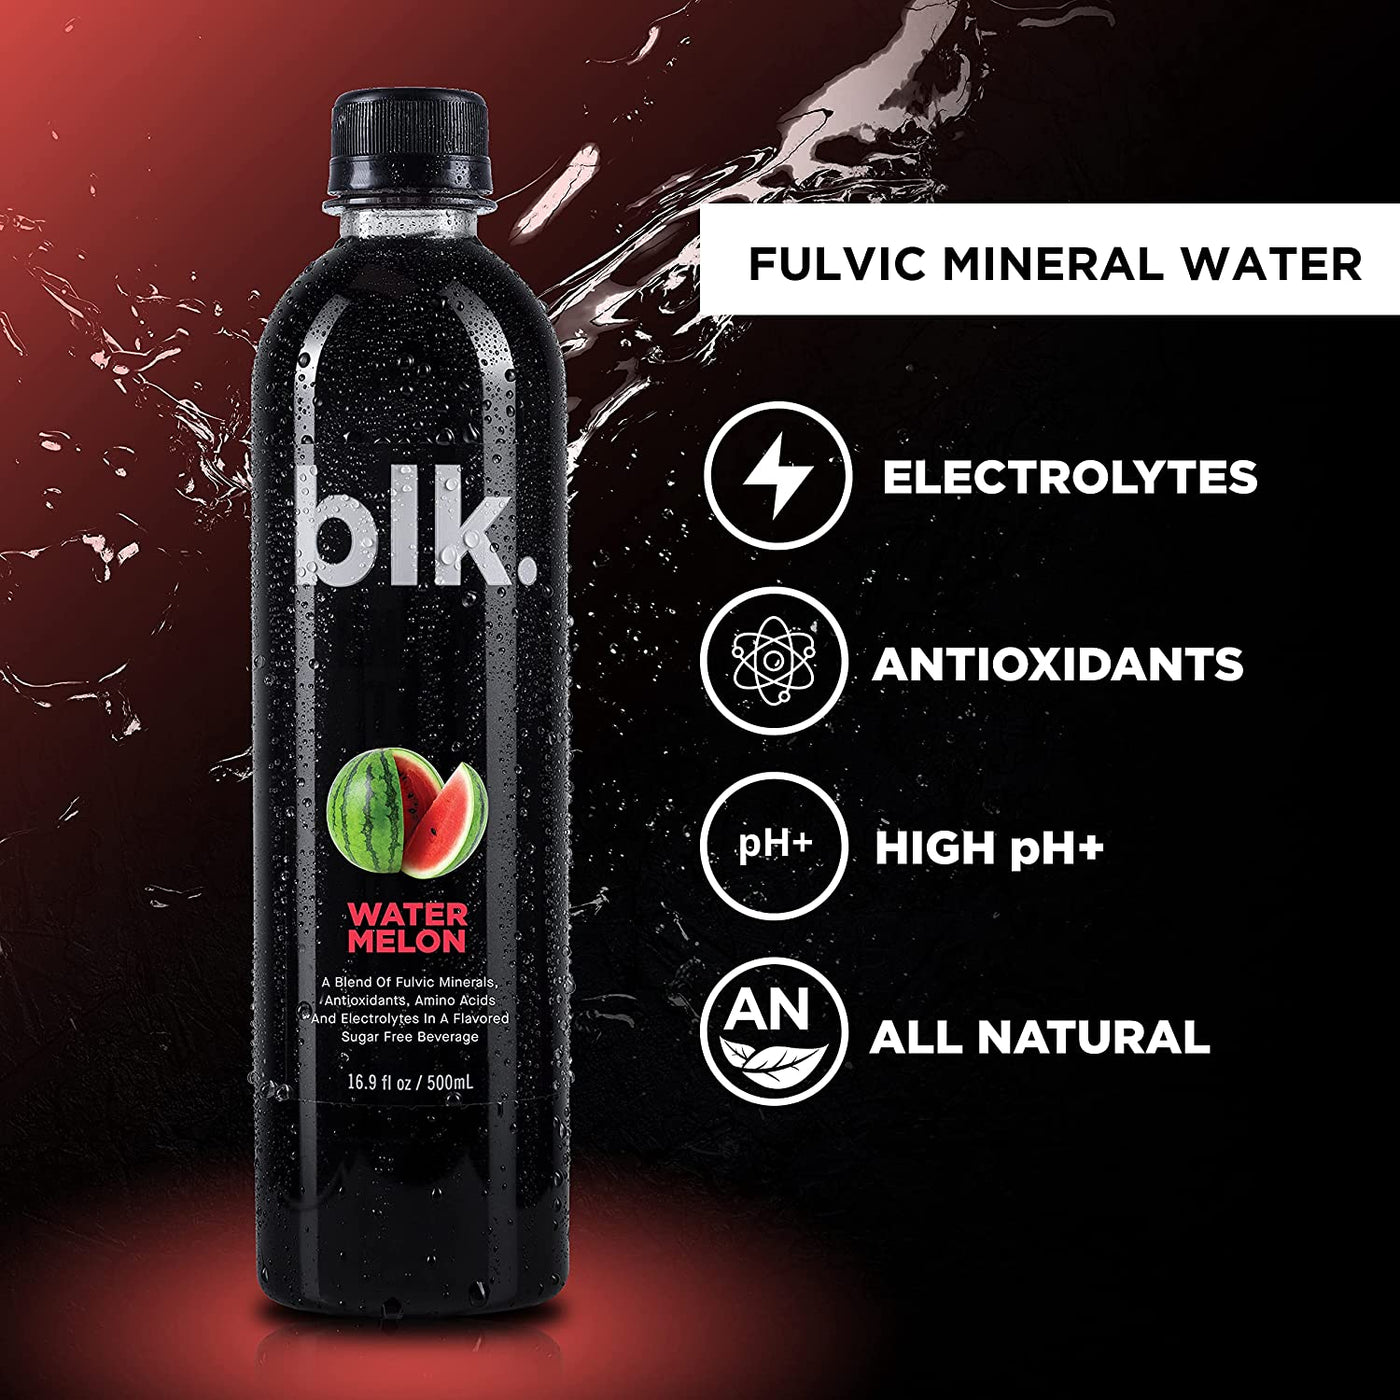 blk water strawberry rhubarb available in Canada Winnipeg, free shipping free delivery